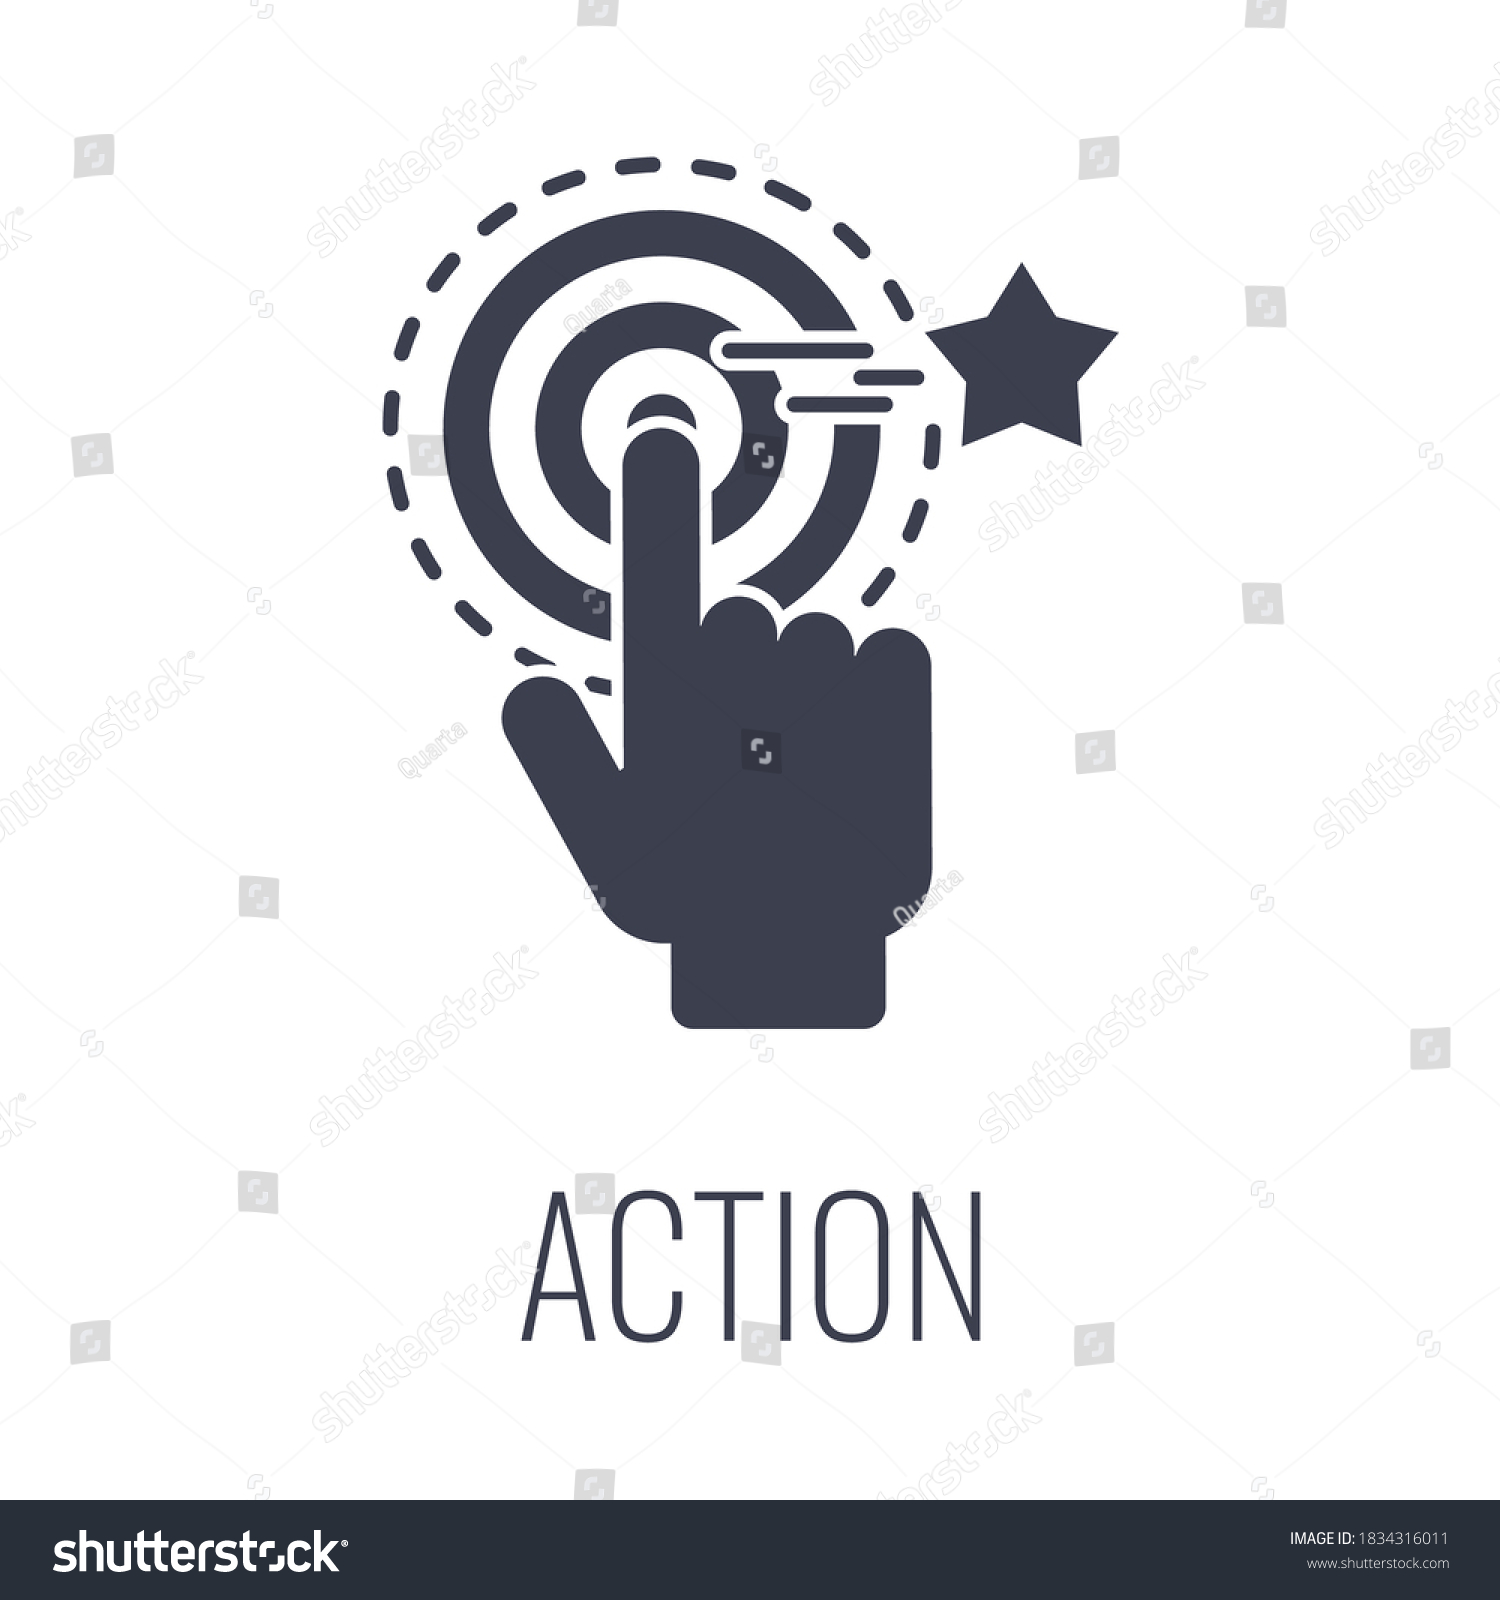 Action Icon Call Action Cta Report Stock Vector (Royalty Free